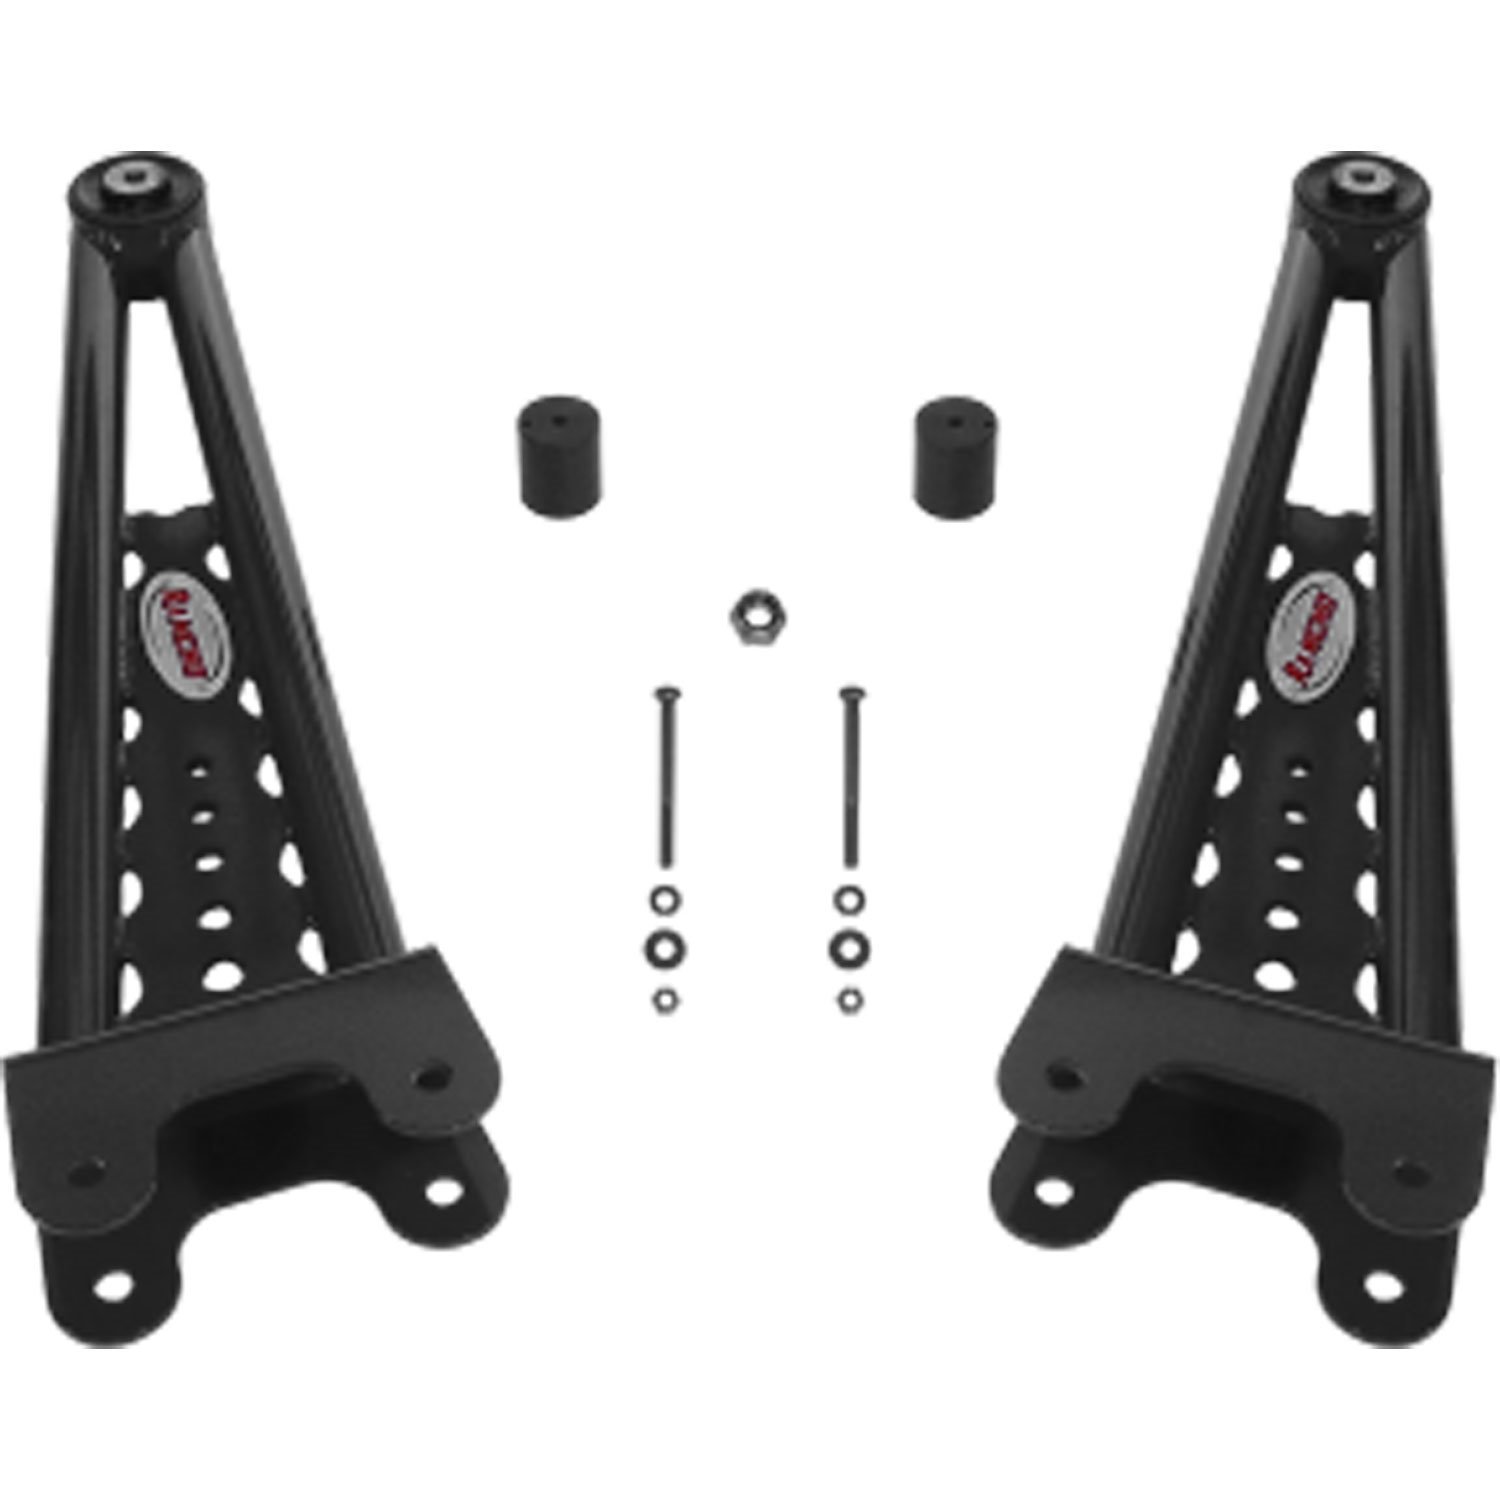 Suspension System Fits Ford F250/F350